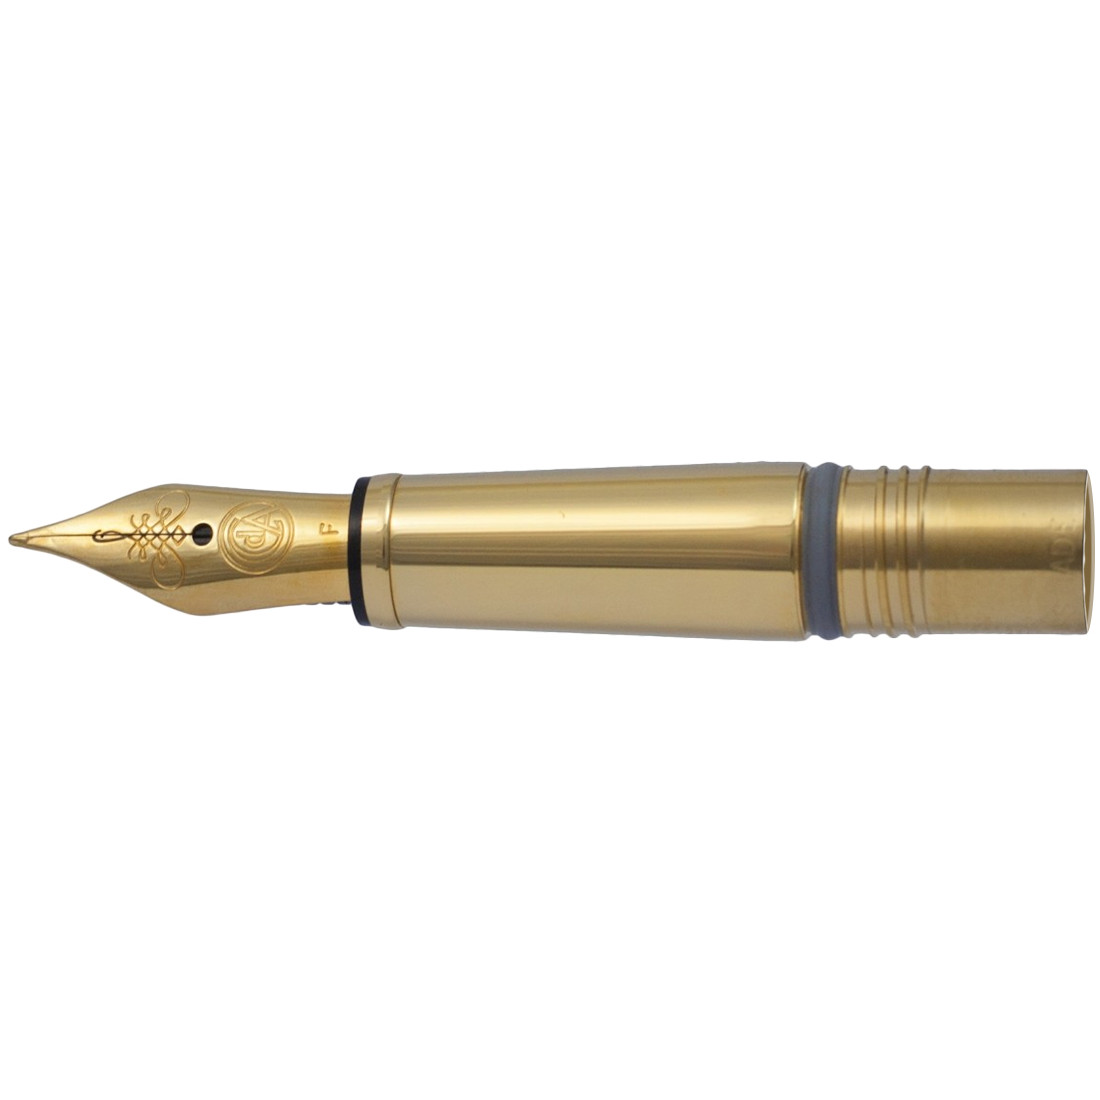 Caran d'Ache Ecridor Nib Section - Stainless Steel Gold Plated